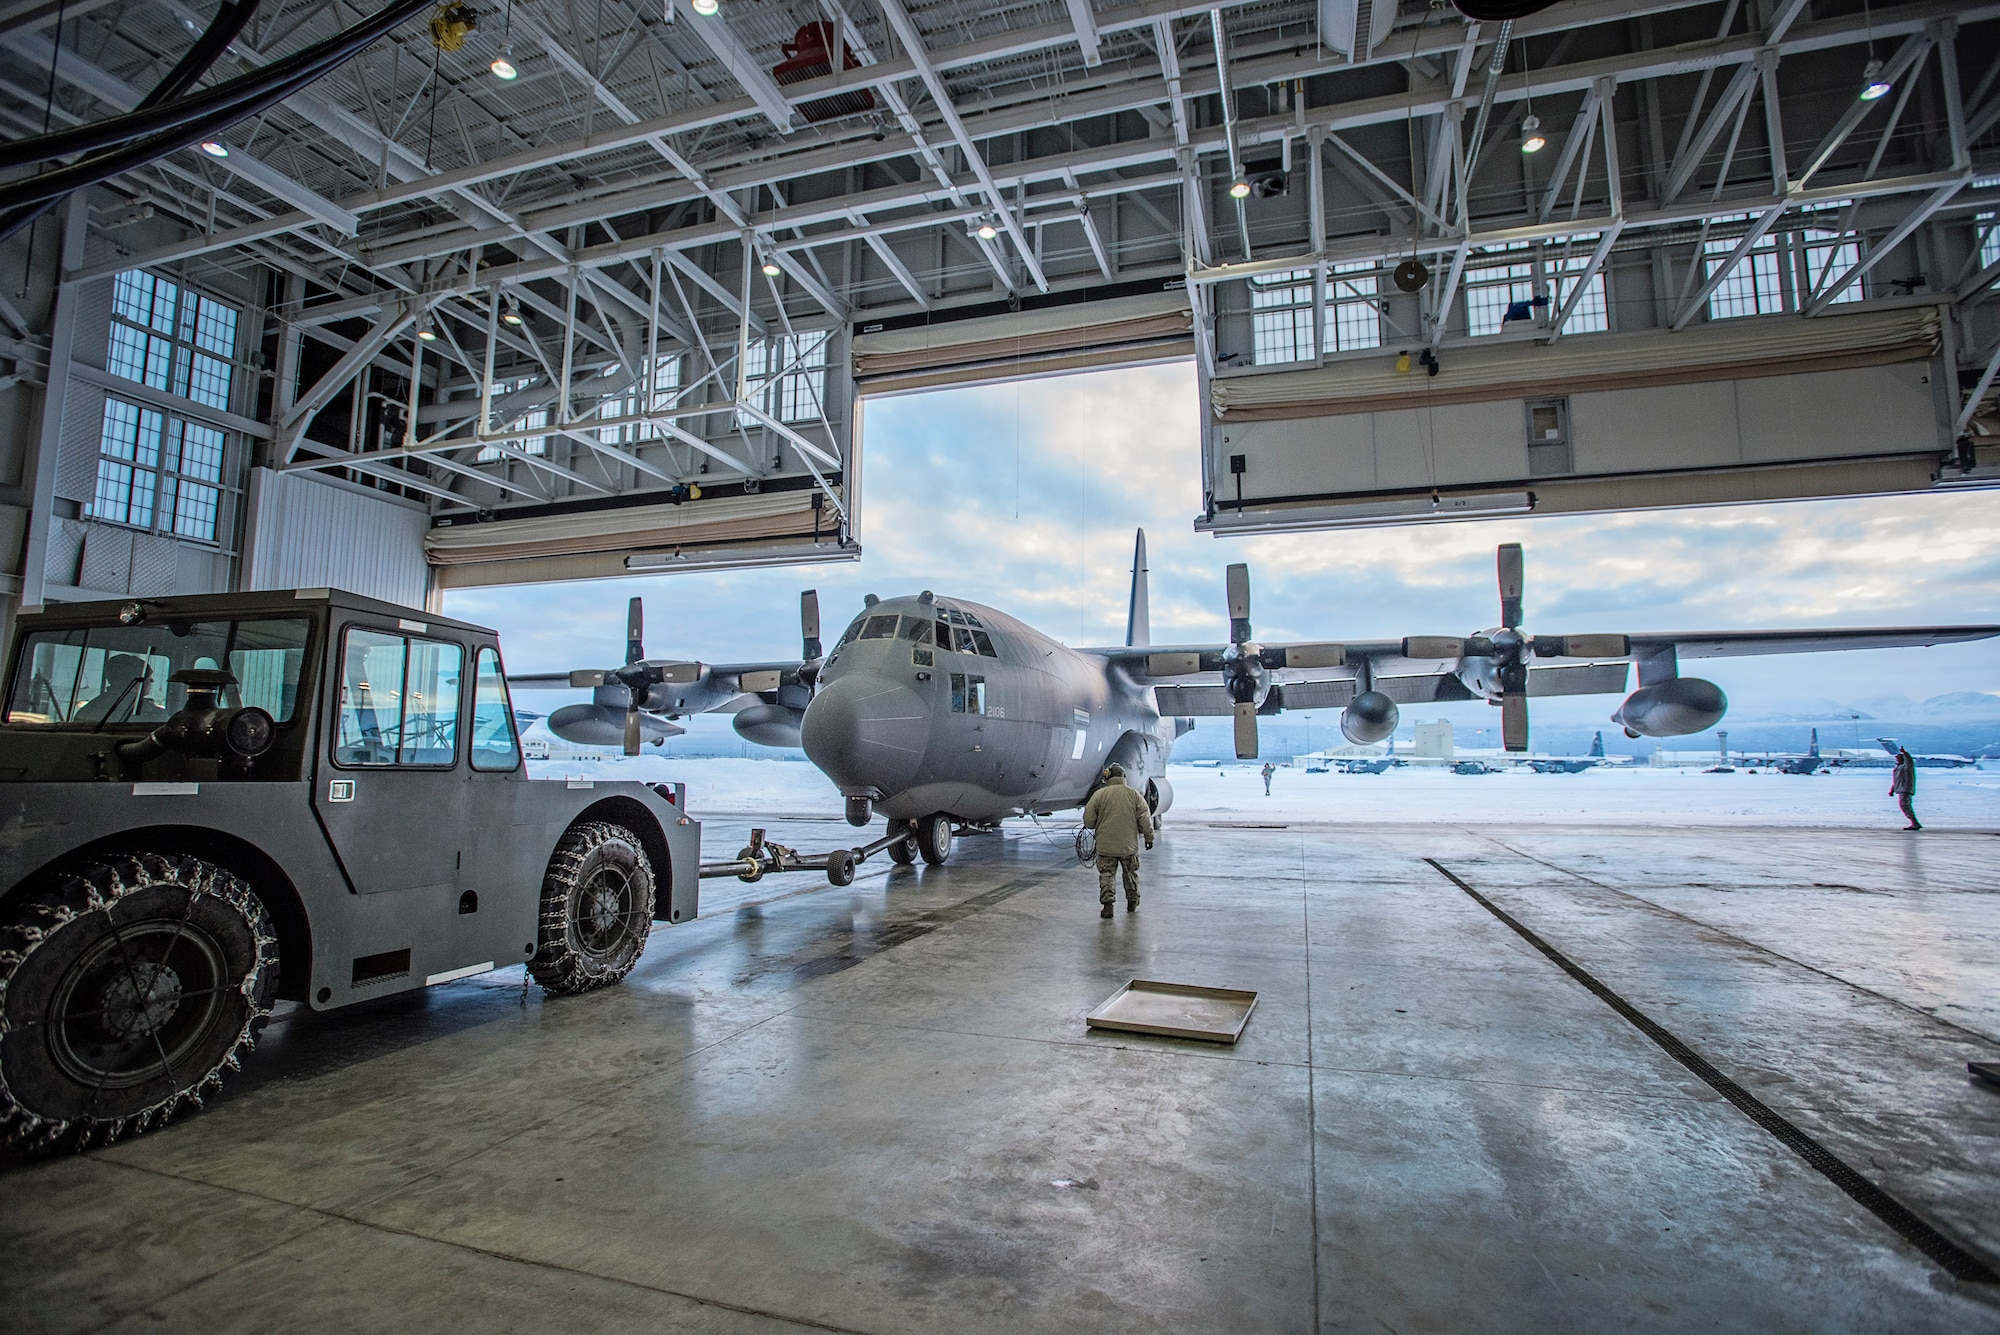 Current and former members of the 211th Rescue Squadron, Alaska Air National Guard, bid farewell to the last of their HC-130N aircraft (tail number 2106) Jan. 17 as it departed here for Patrick Air Force Base, Florida. The HC-130 variants of the C-130 family of aircraft are designed for long-range search-and-rescue missions. They are set up to provide command and control, airdrop of pararescue personnel and equipment, and perform air-refueling missions for helicopters like the HH-60 Pave Hawk helicopters flown by the 211th’s sister unit, the 210th Rescue Squadron. The older HC-130N’s are scheduled to be replaced with four new HC-130J “Combat King II” aircraft which are currently being manufactured at Lockheed Martin in Georgia. (U.S. Air National Guard photo by Staff Sgt. Edward Eagerton/released)